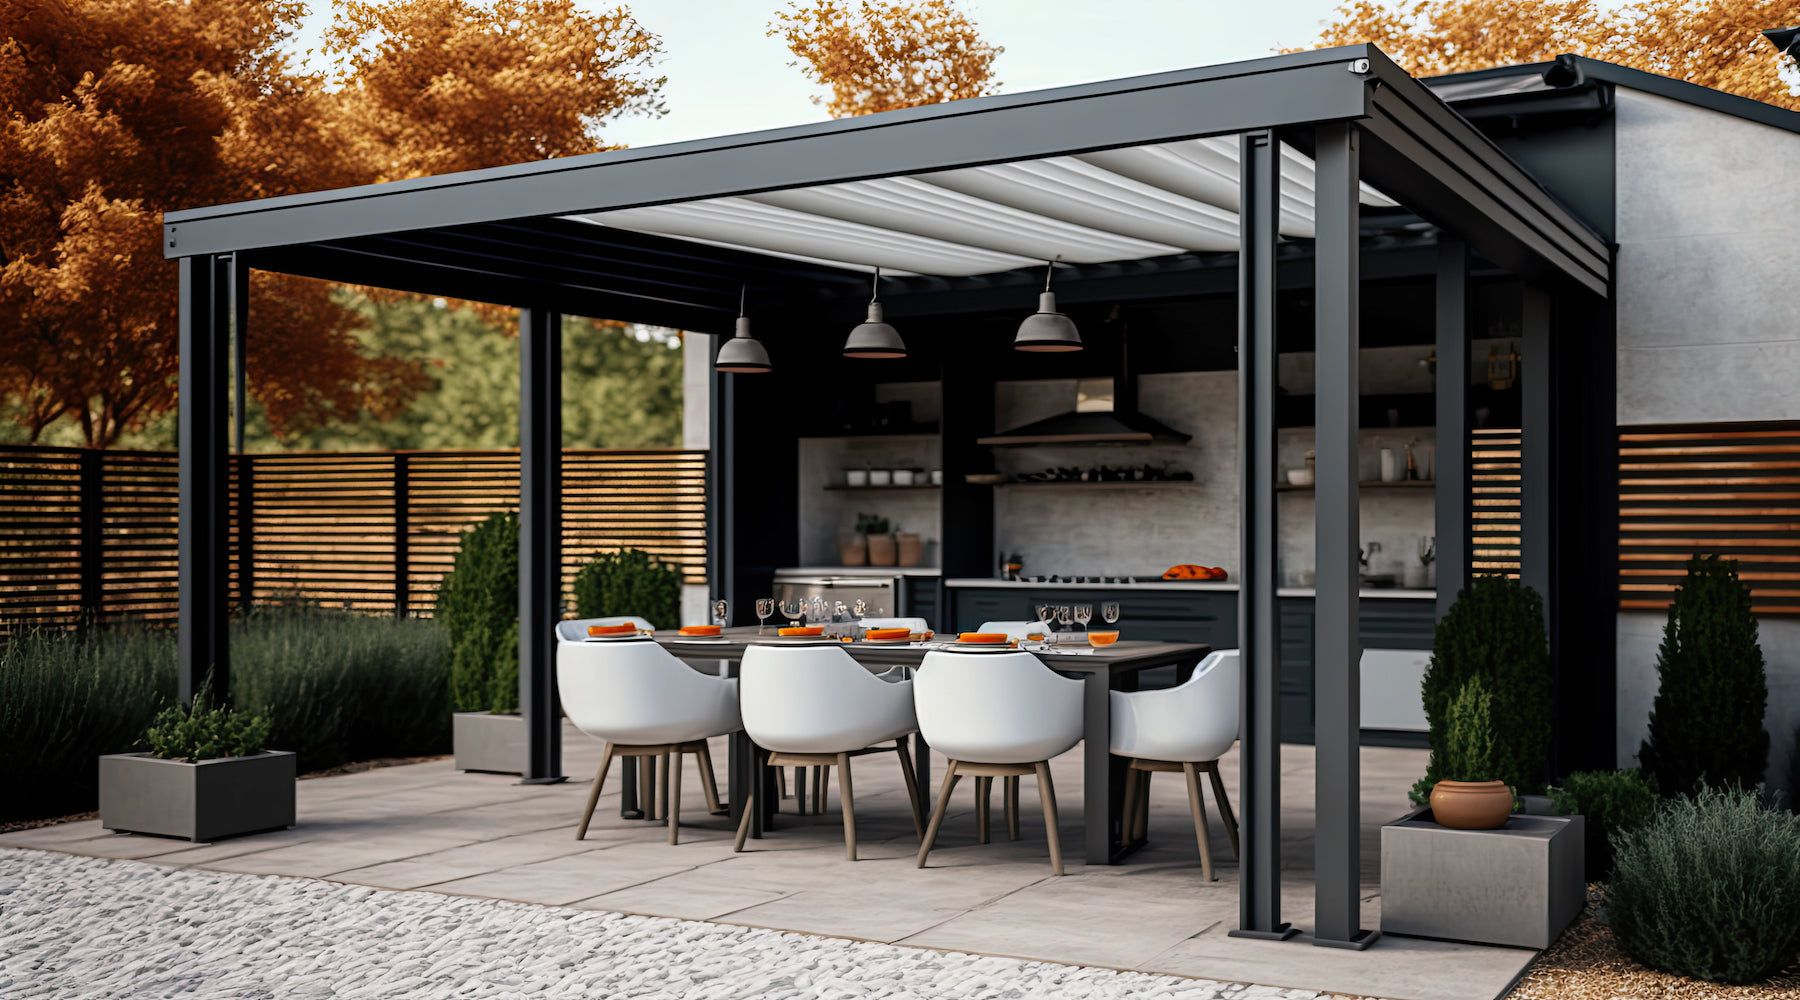 Outdoor hanging lights installed over a table under a pergola